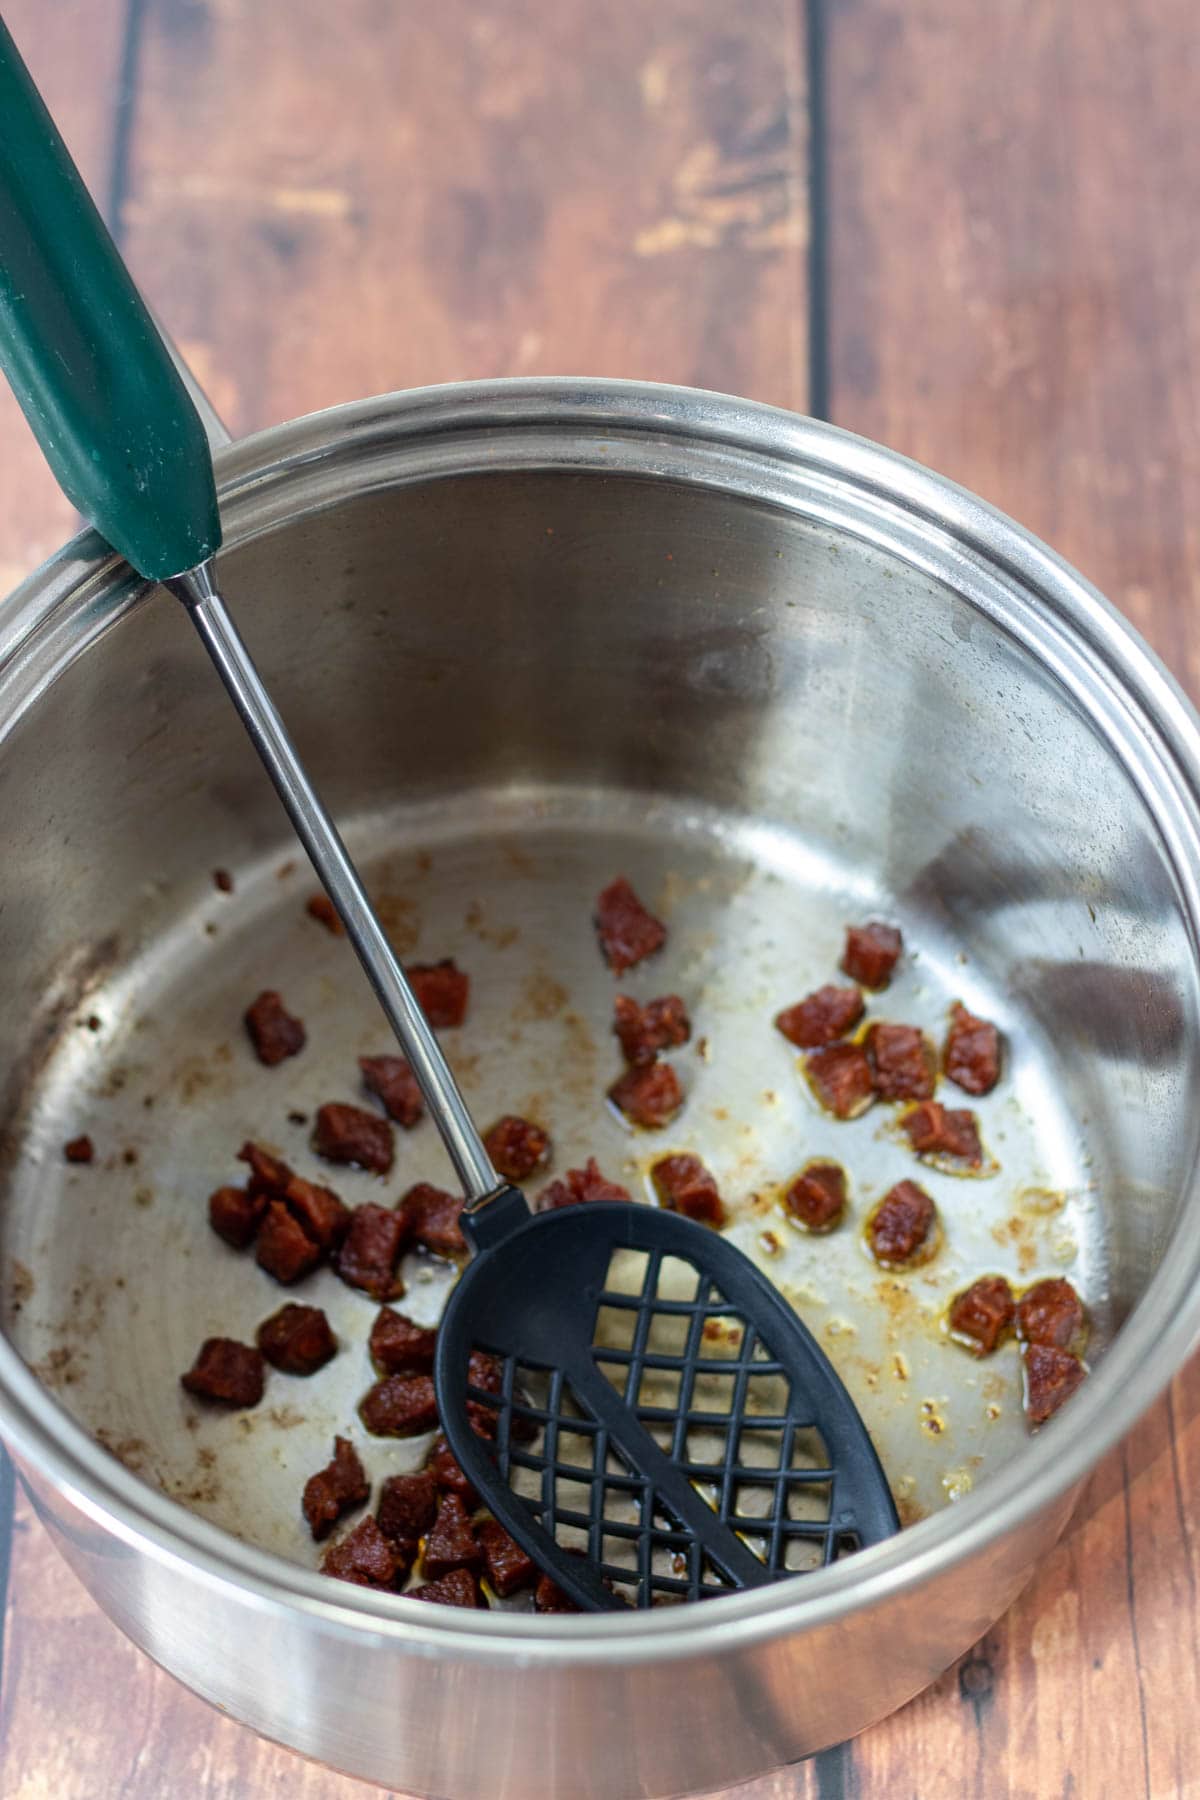 Chopped chorizo stirred and browned in a heated saucepan with a slotted spoon.